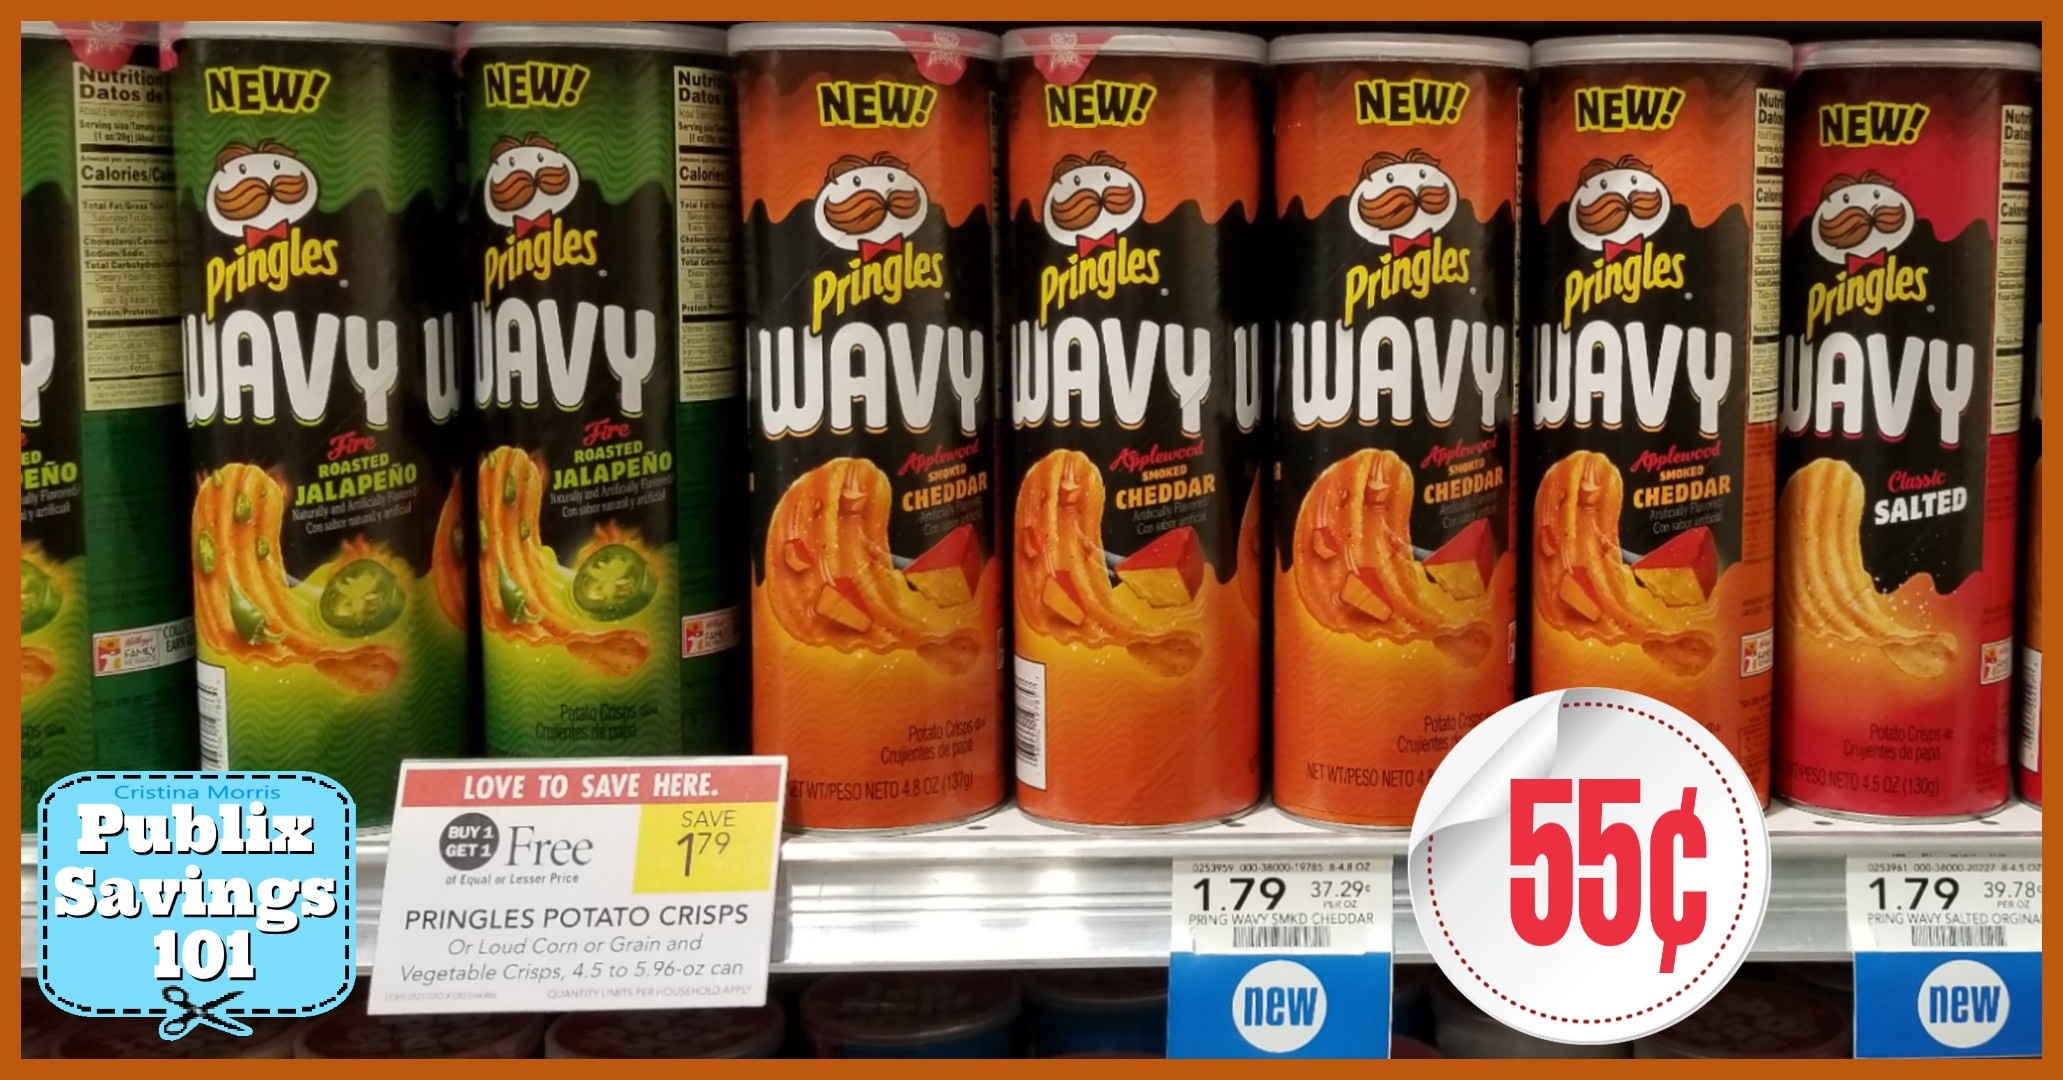 Pringles Wavy – Only 55¢ Each | Publix Savings 101 - Free Printable Pringles Coupons